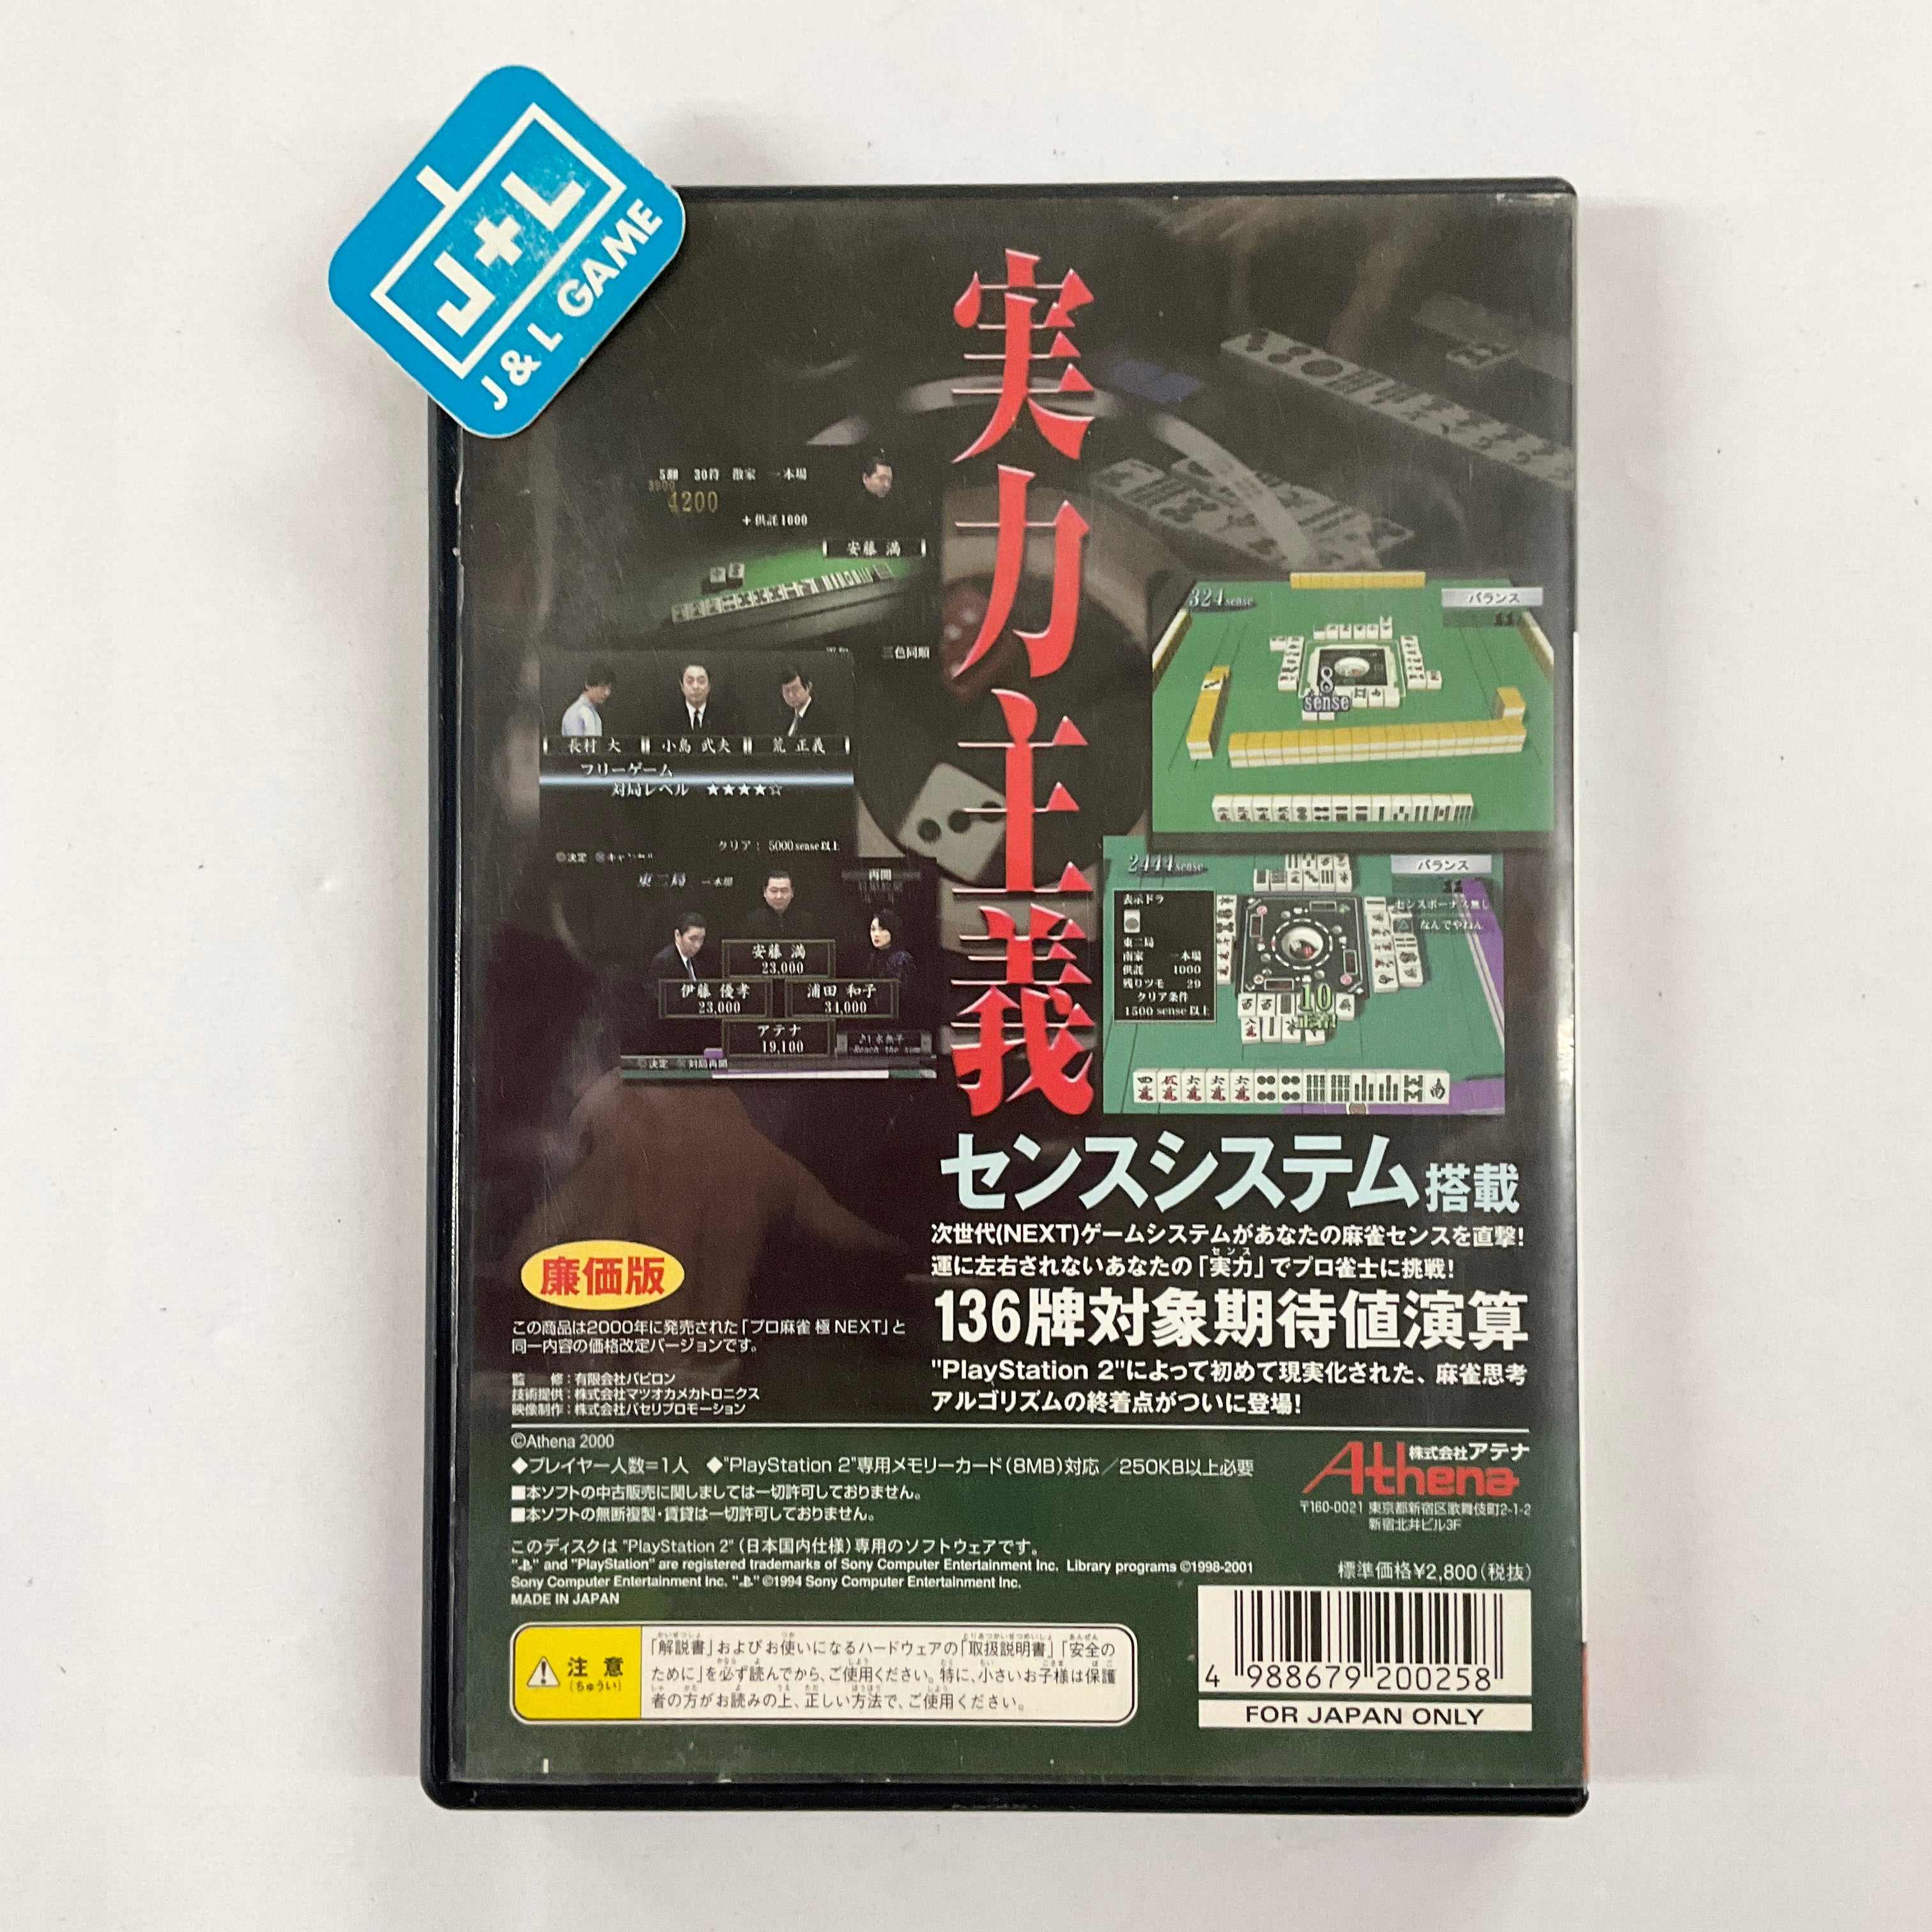 Pro Mahjong Kiwame Next (Low Price Edition) - (PS2) PlayStation 2 [Pre-Owned] (Japanese Import) Video Games Athena   